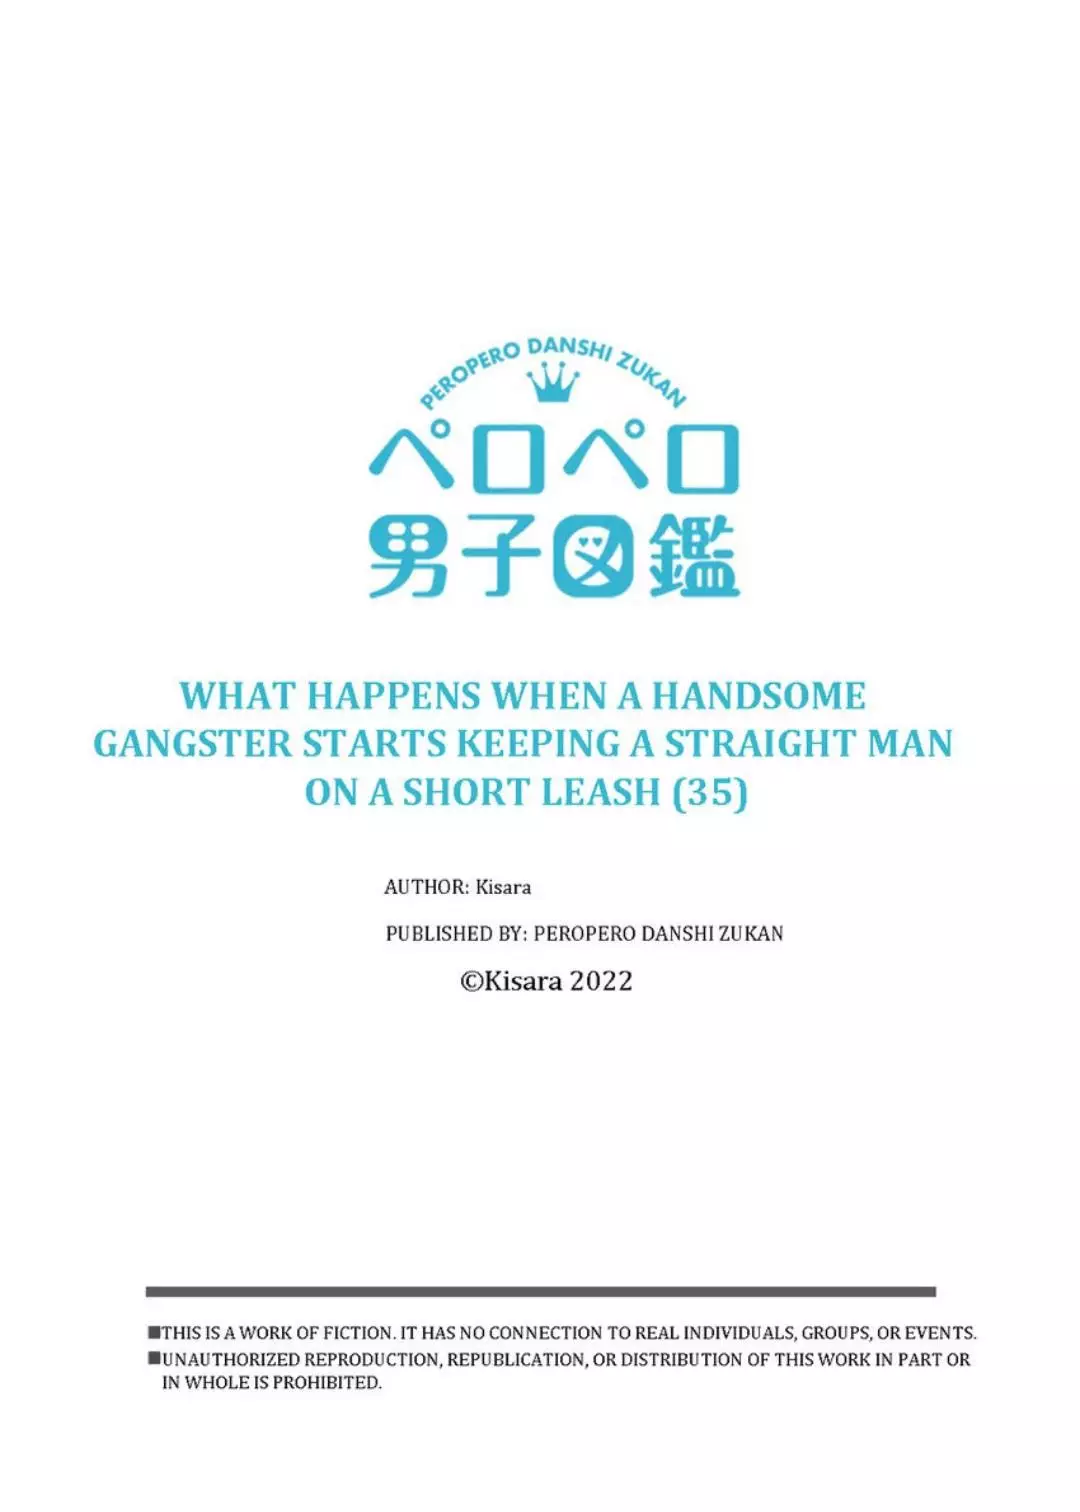 What Happens When A Handsome Gangster Starts Keeping A Straight Man On A Short Leash - 35 page 29-656f5df4